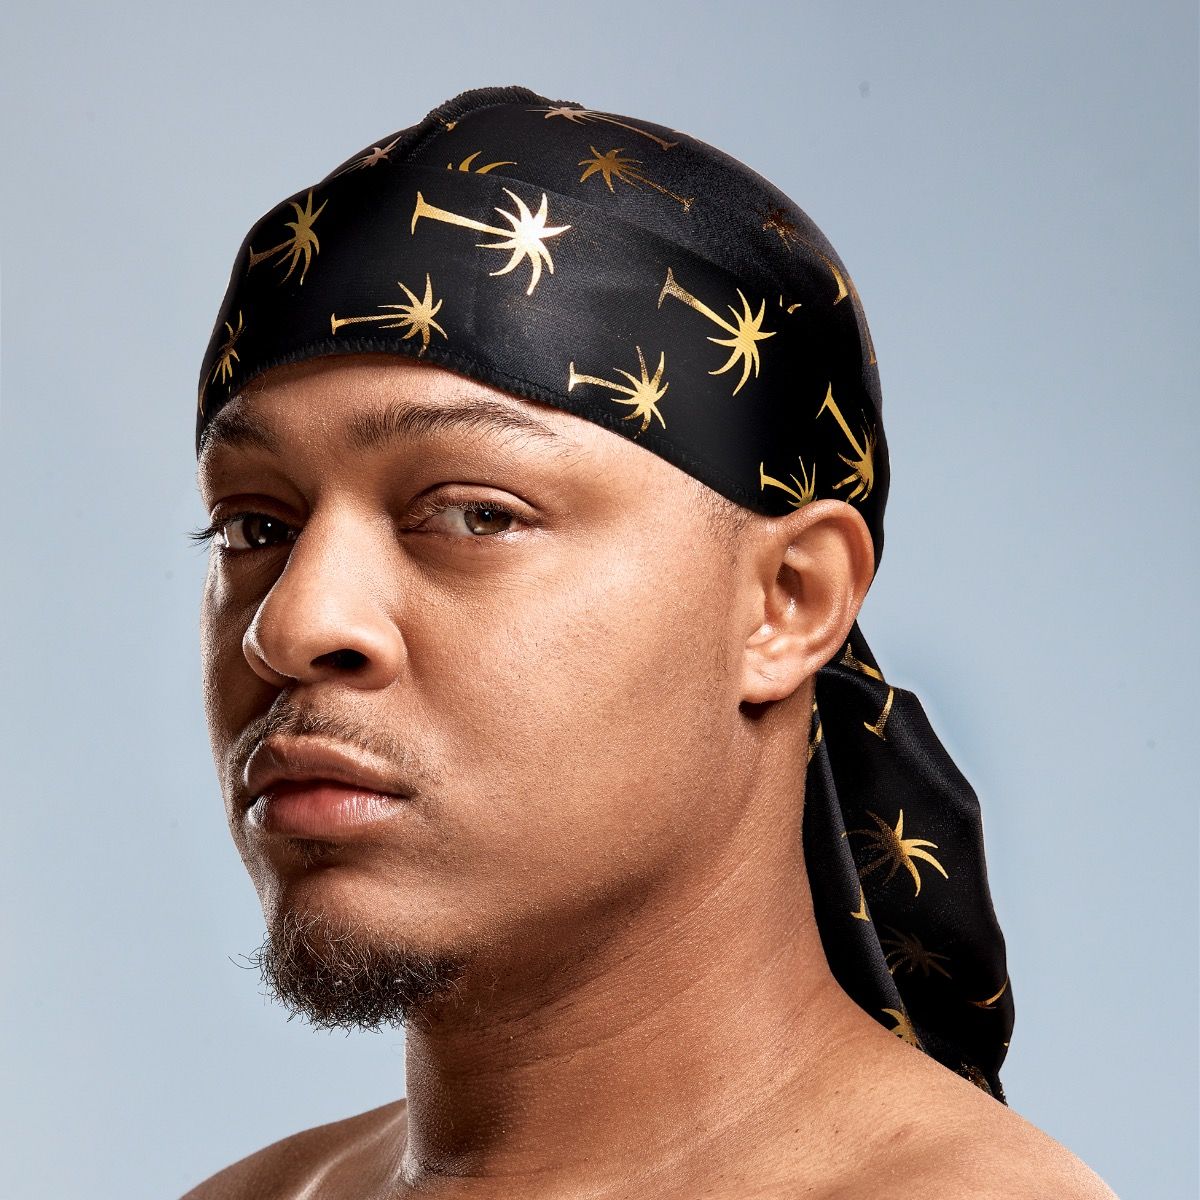 RED POWER WAVE LIT SILKY DURAG - PALM TREE